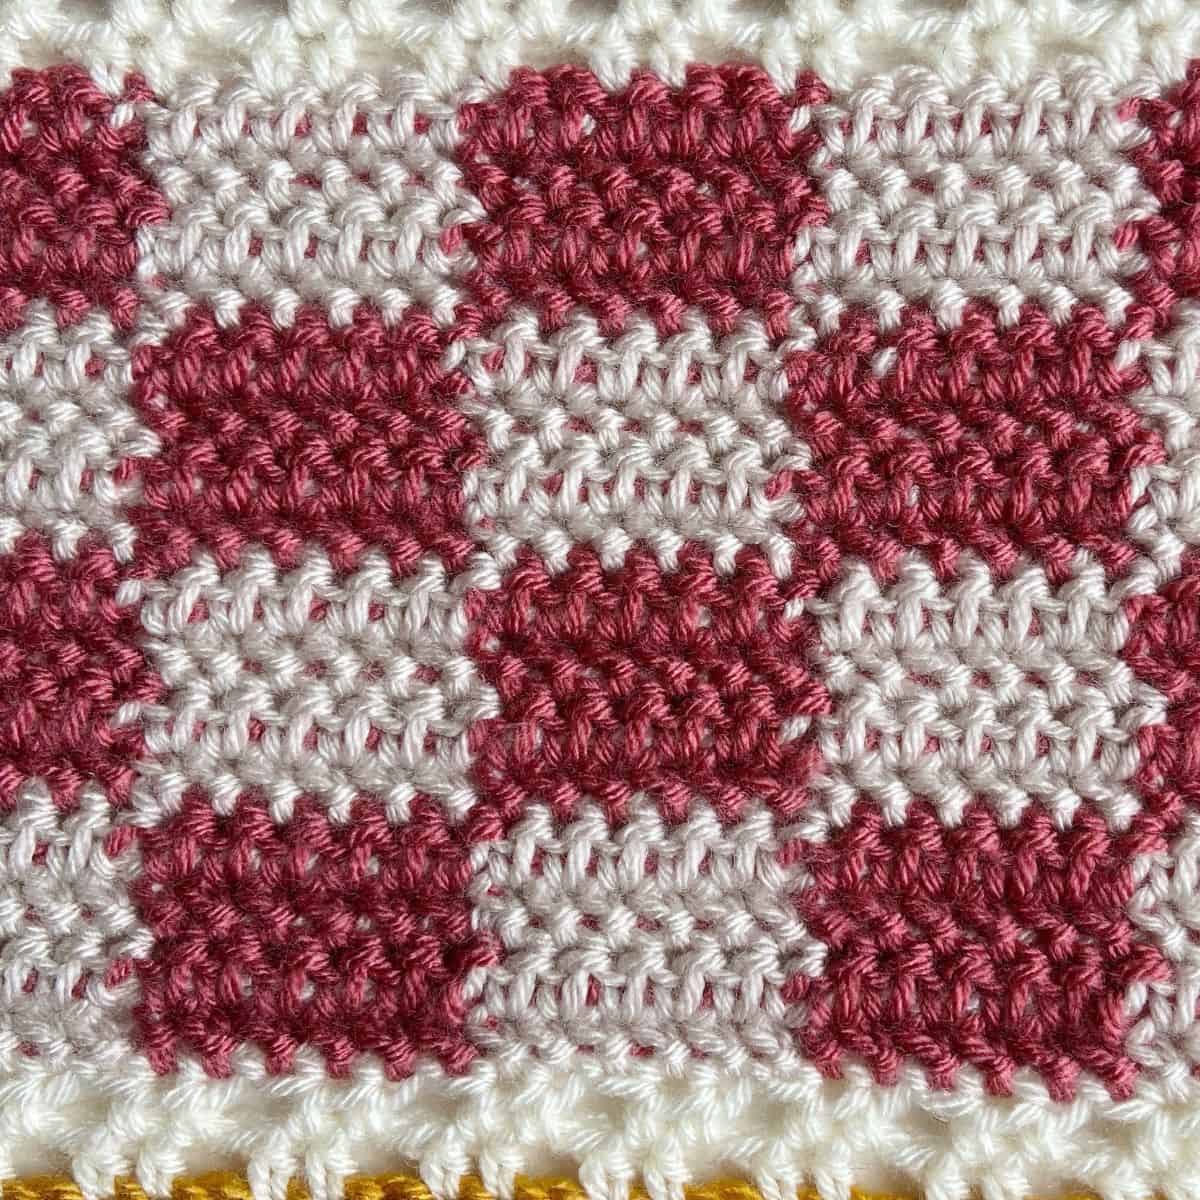 crochet stitch tutorials Archives, Page 2 of 3